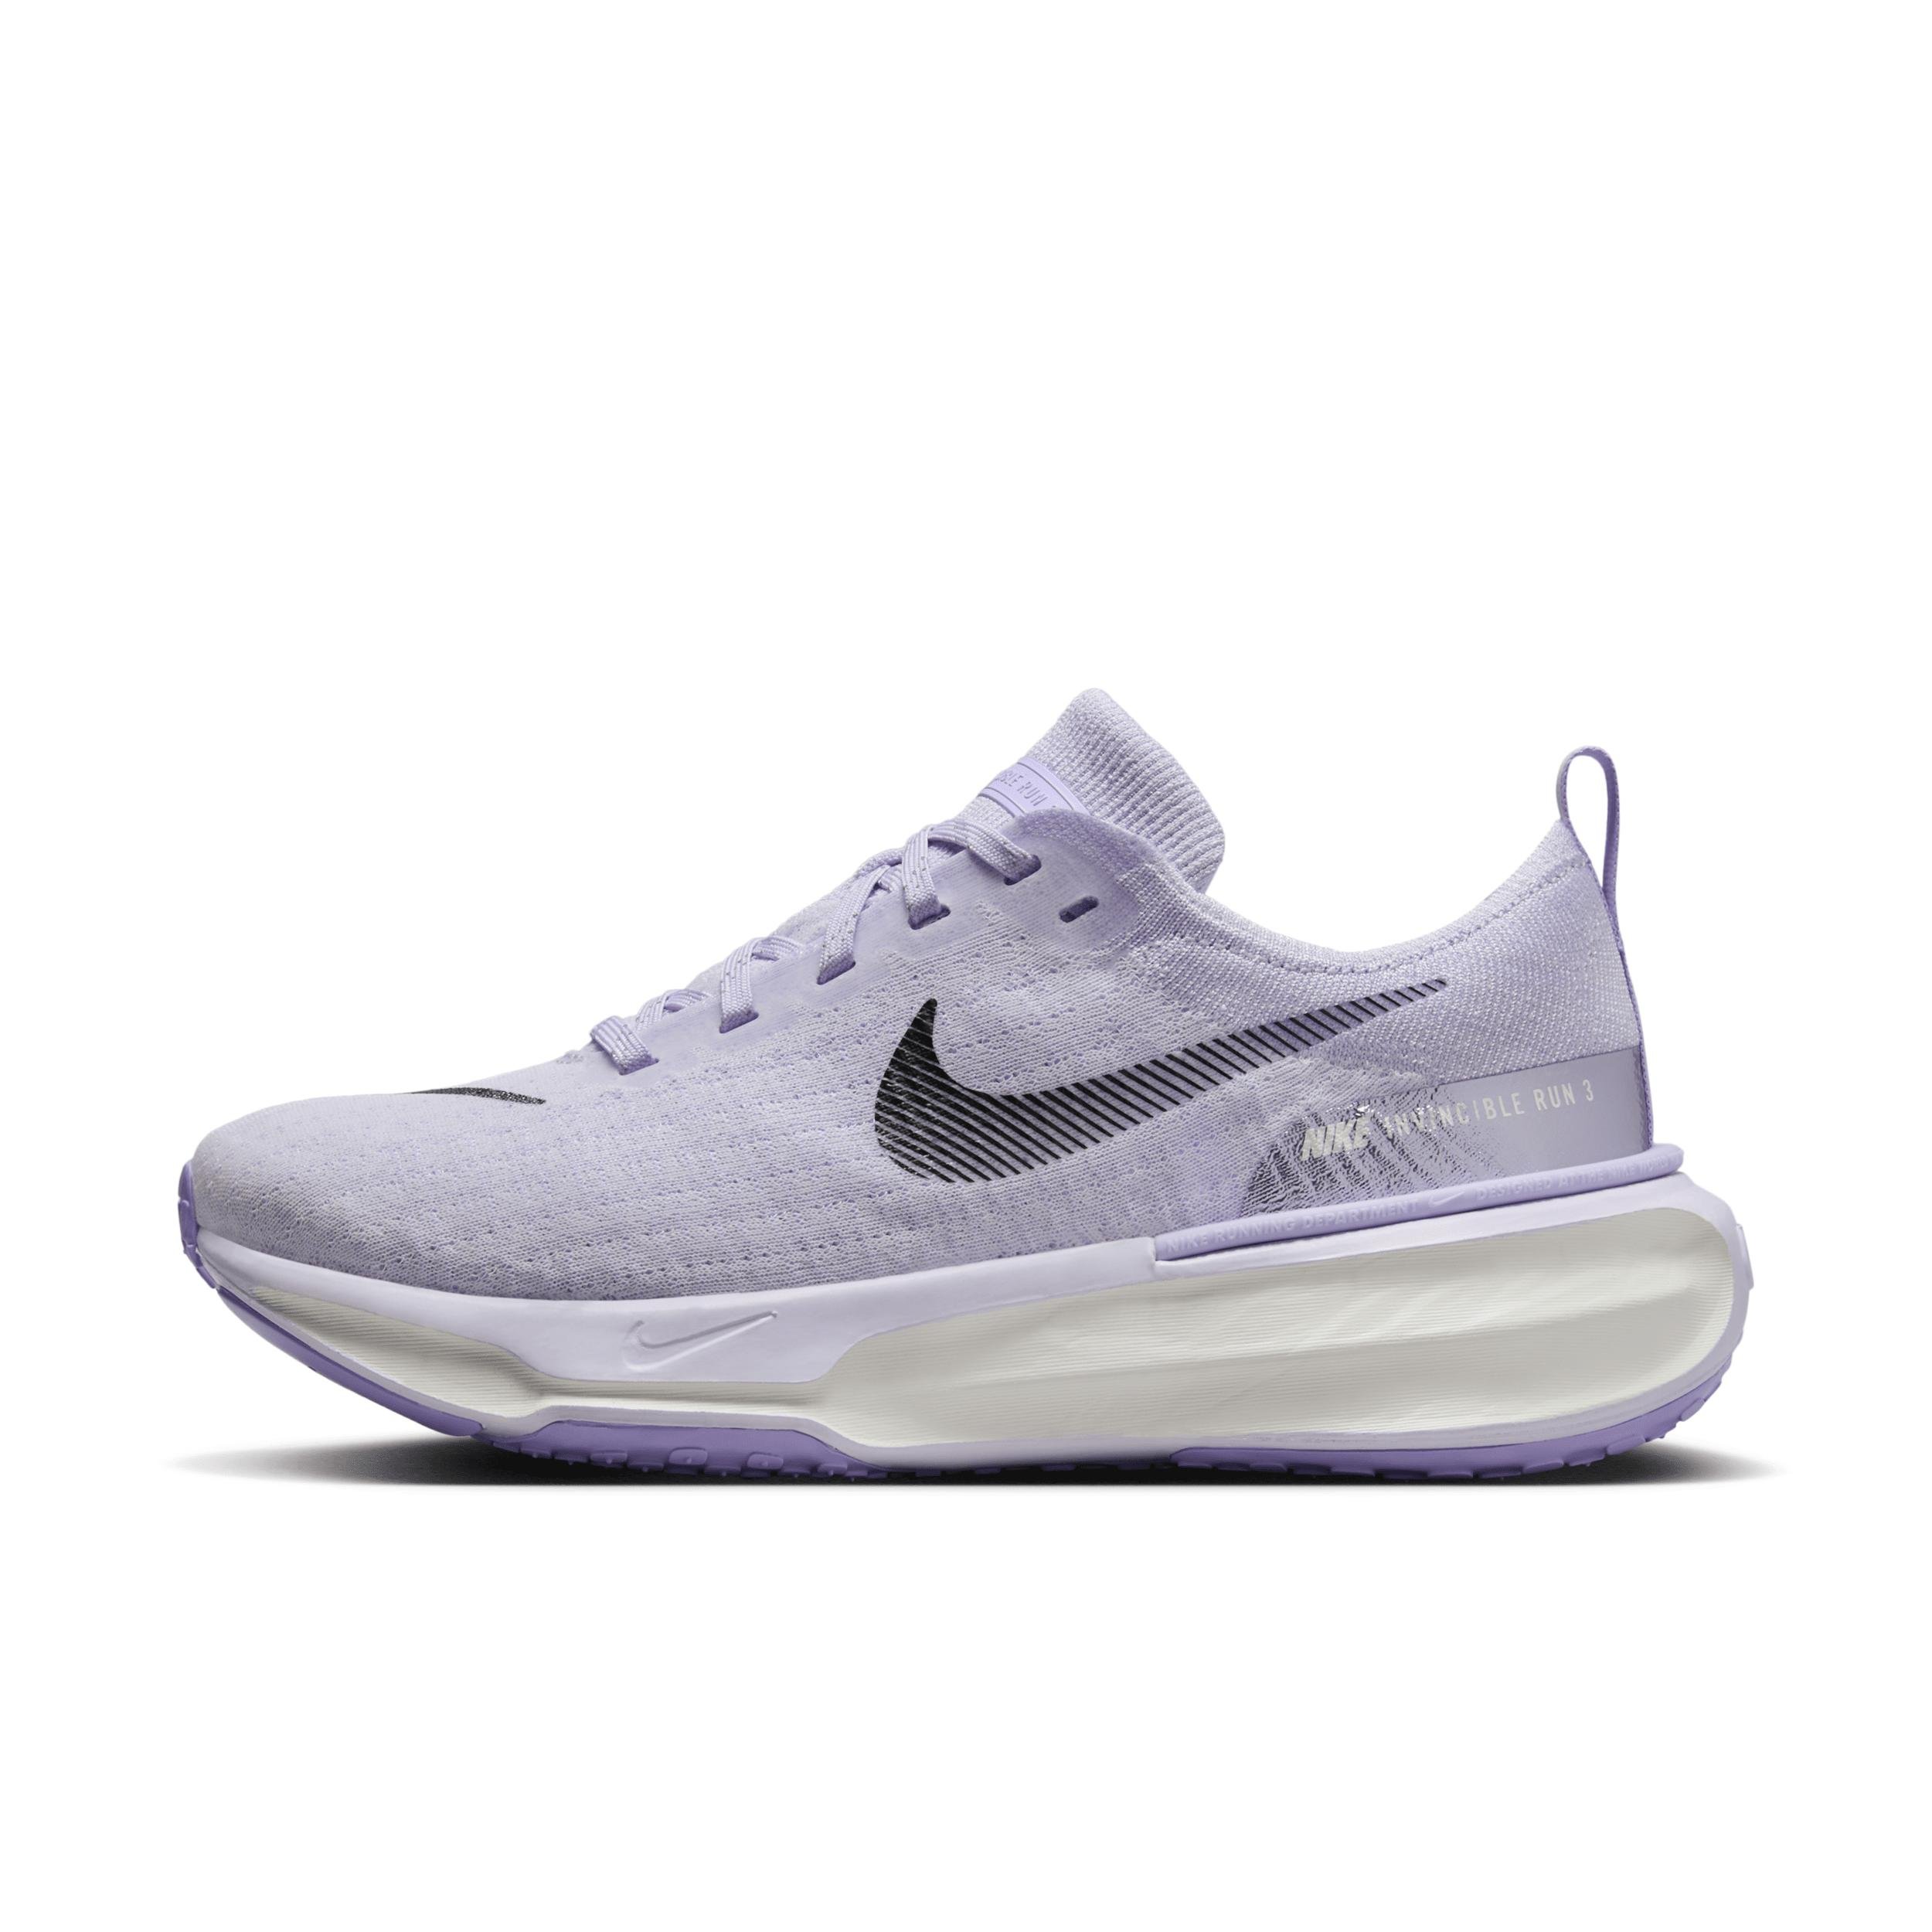 Nike Women's Invincible 3 Road Running Shoes (Extra Wide) by NIKE